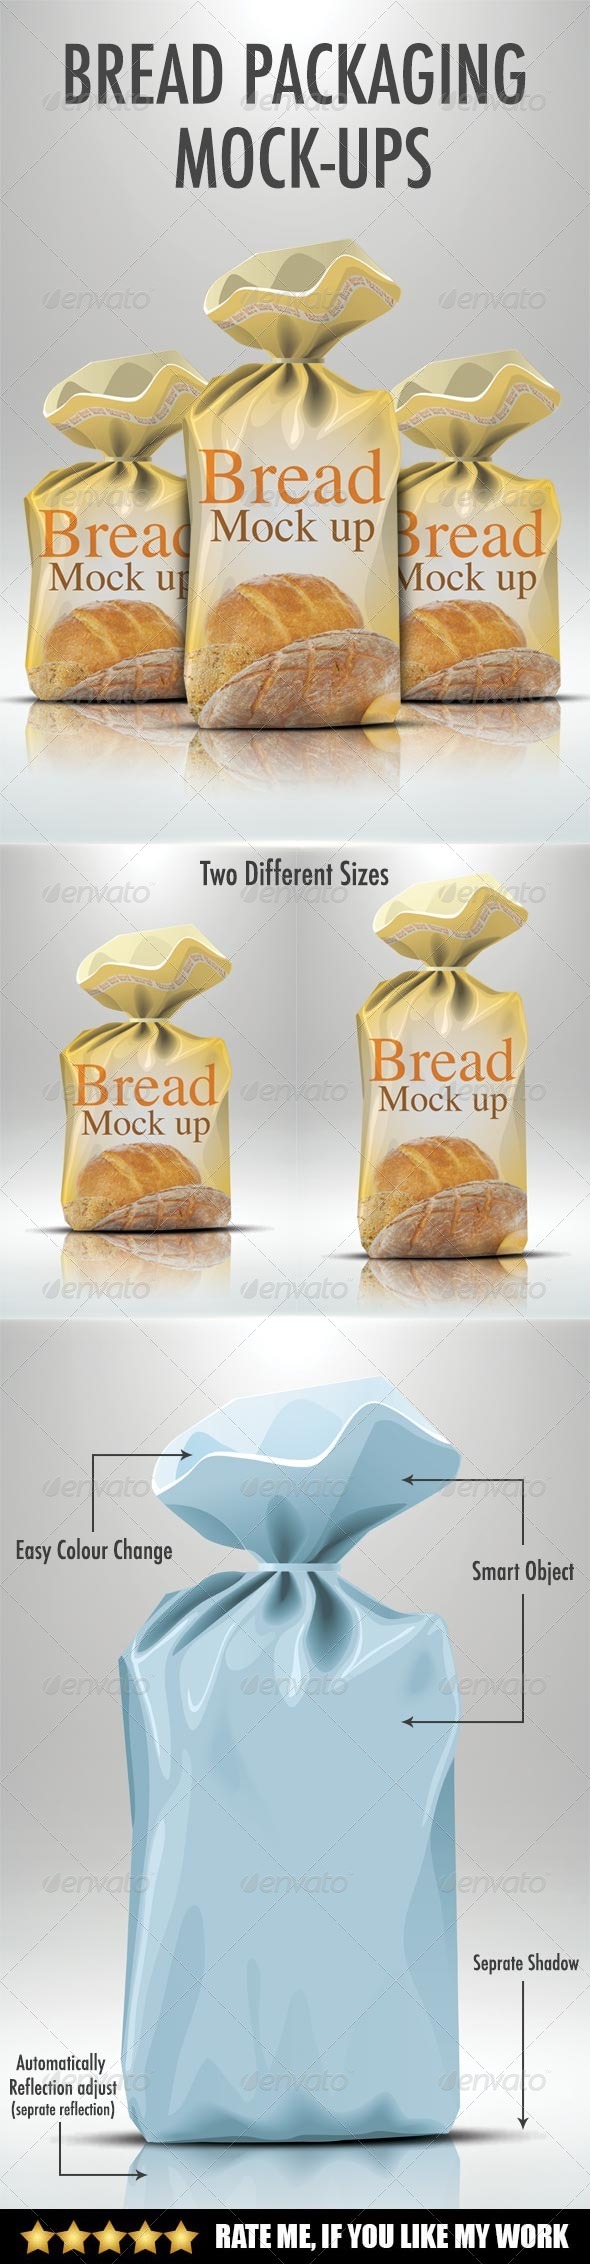 Download Bread packaging mock-up by Artsignz | GraphicRiver